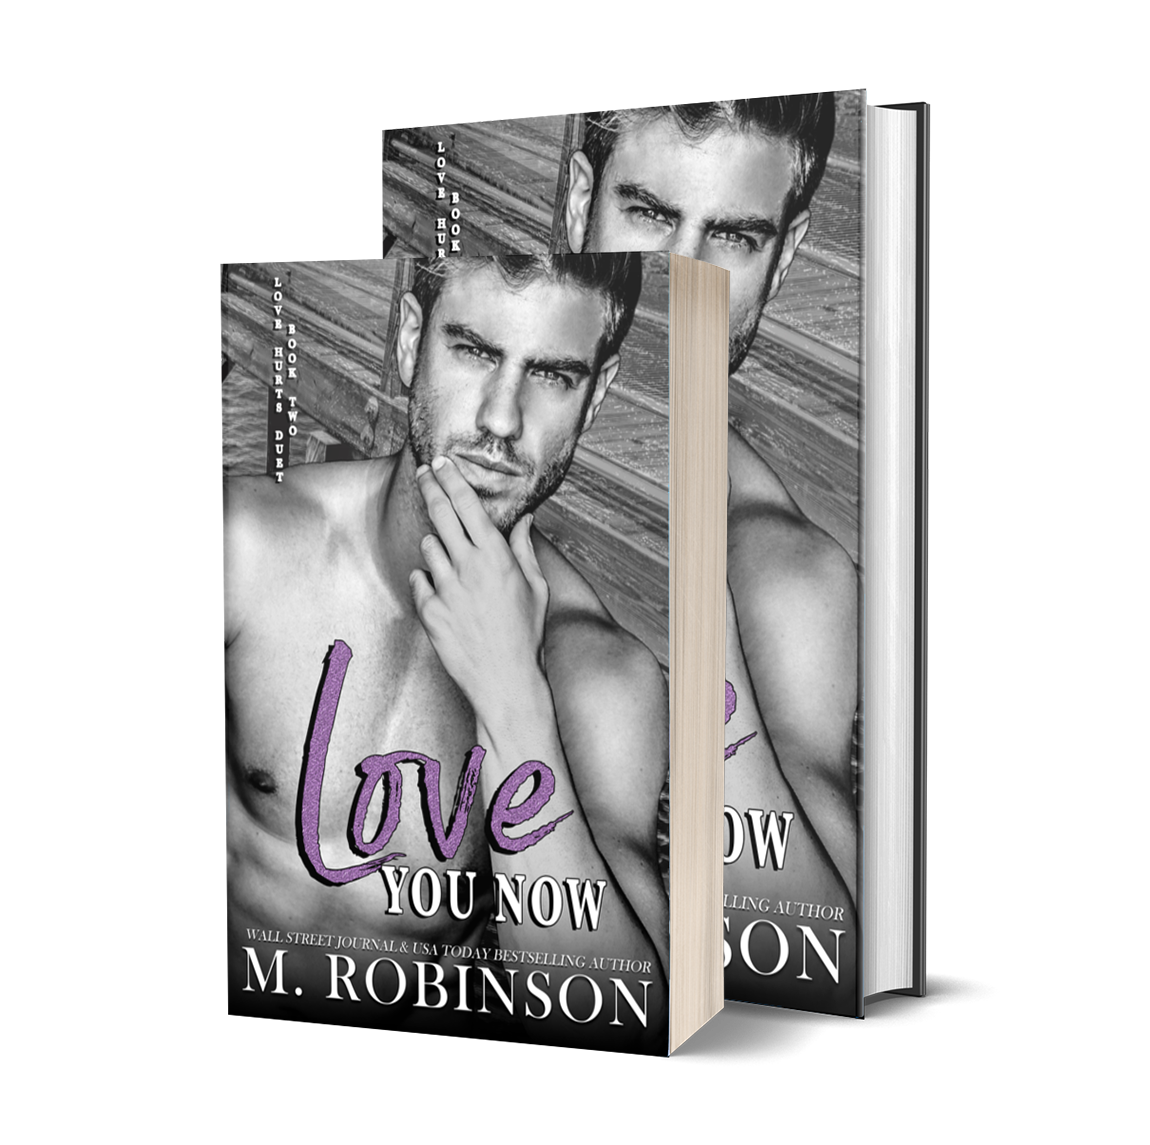 Love You Now: Enemies to Lovers Romance (Love Hurts Duet Book 2)